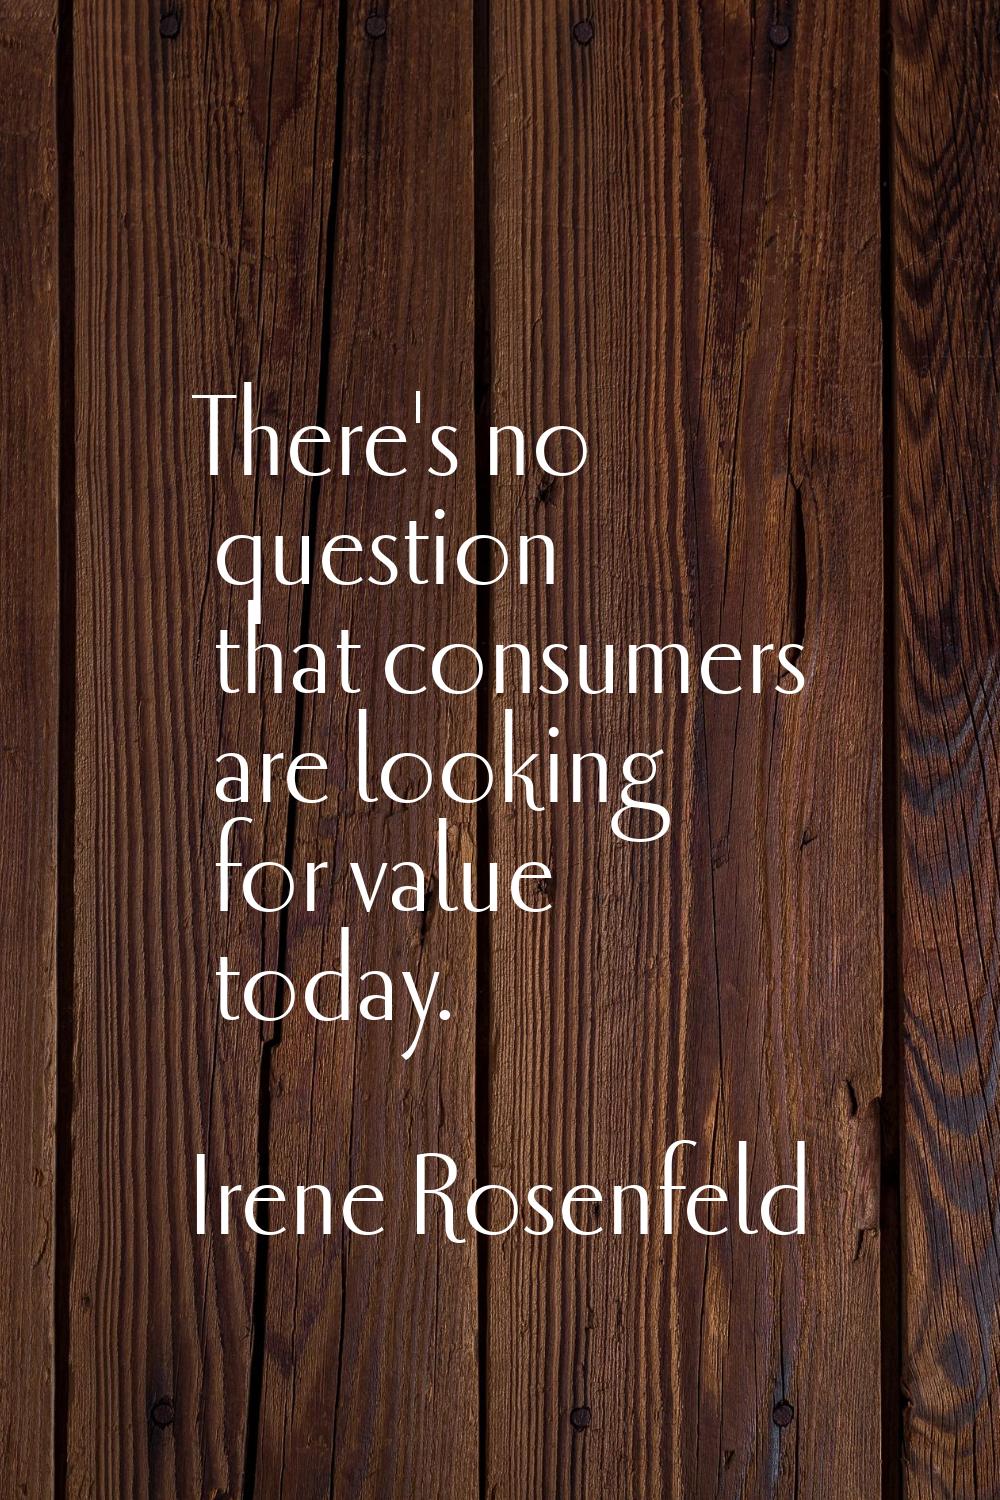 There's no question that consumers are looking for value today.